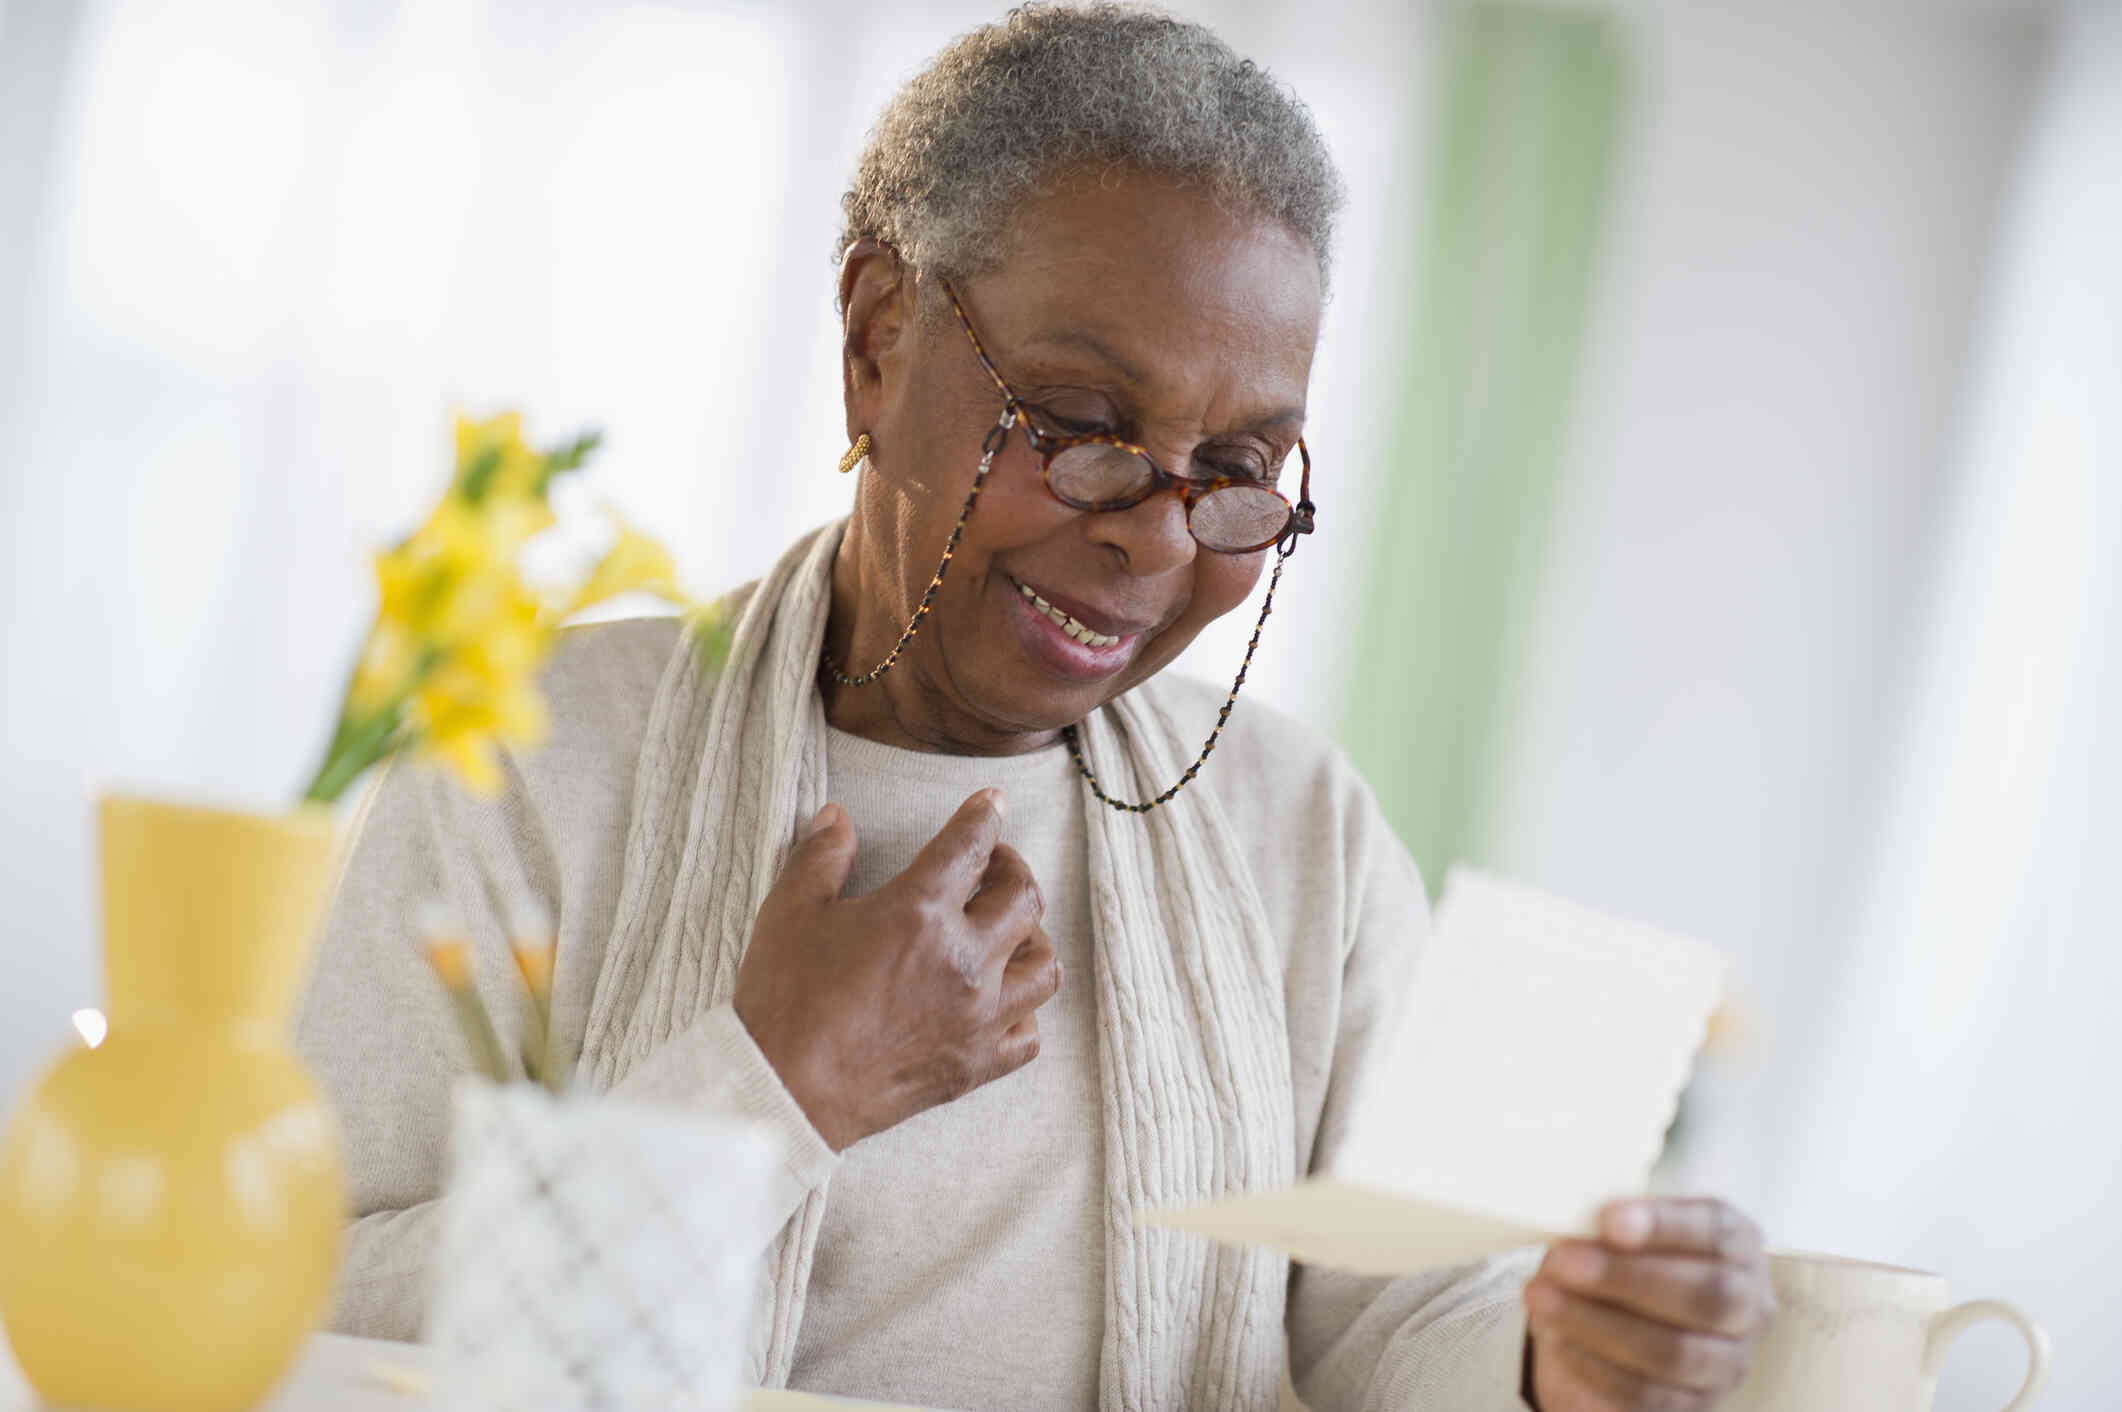 An elderly woman with glasses smiles down at a piece of paper in her hand.